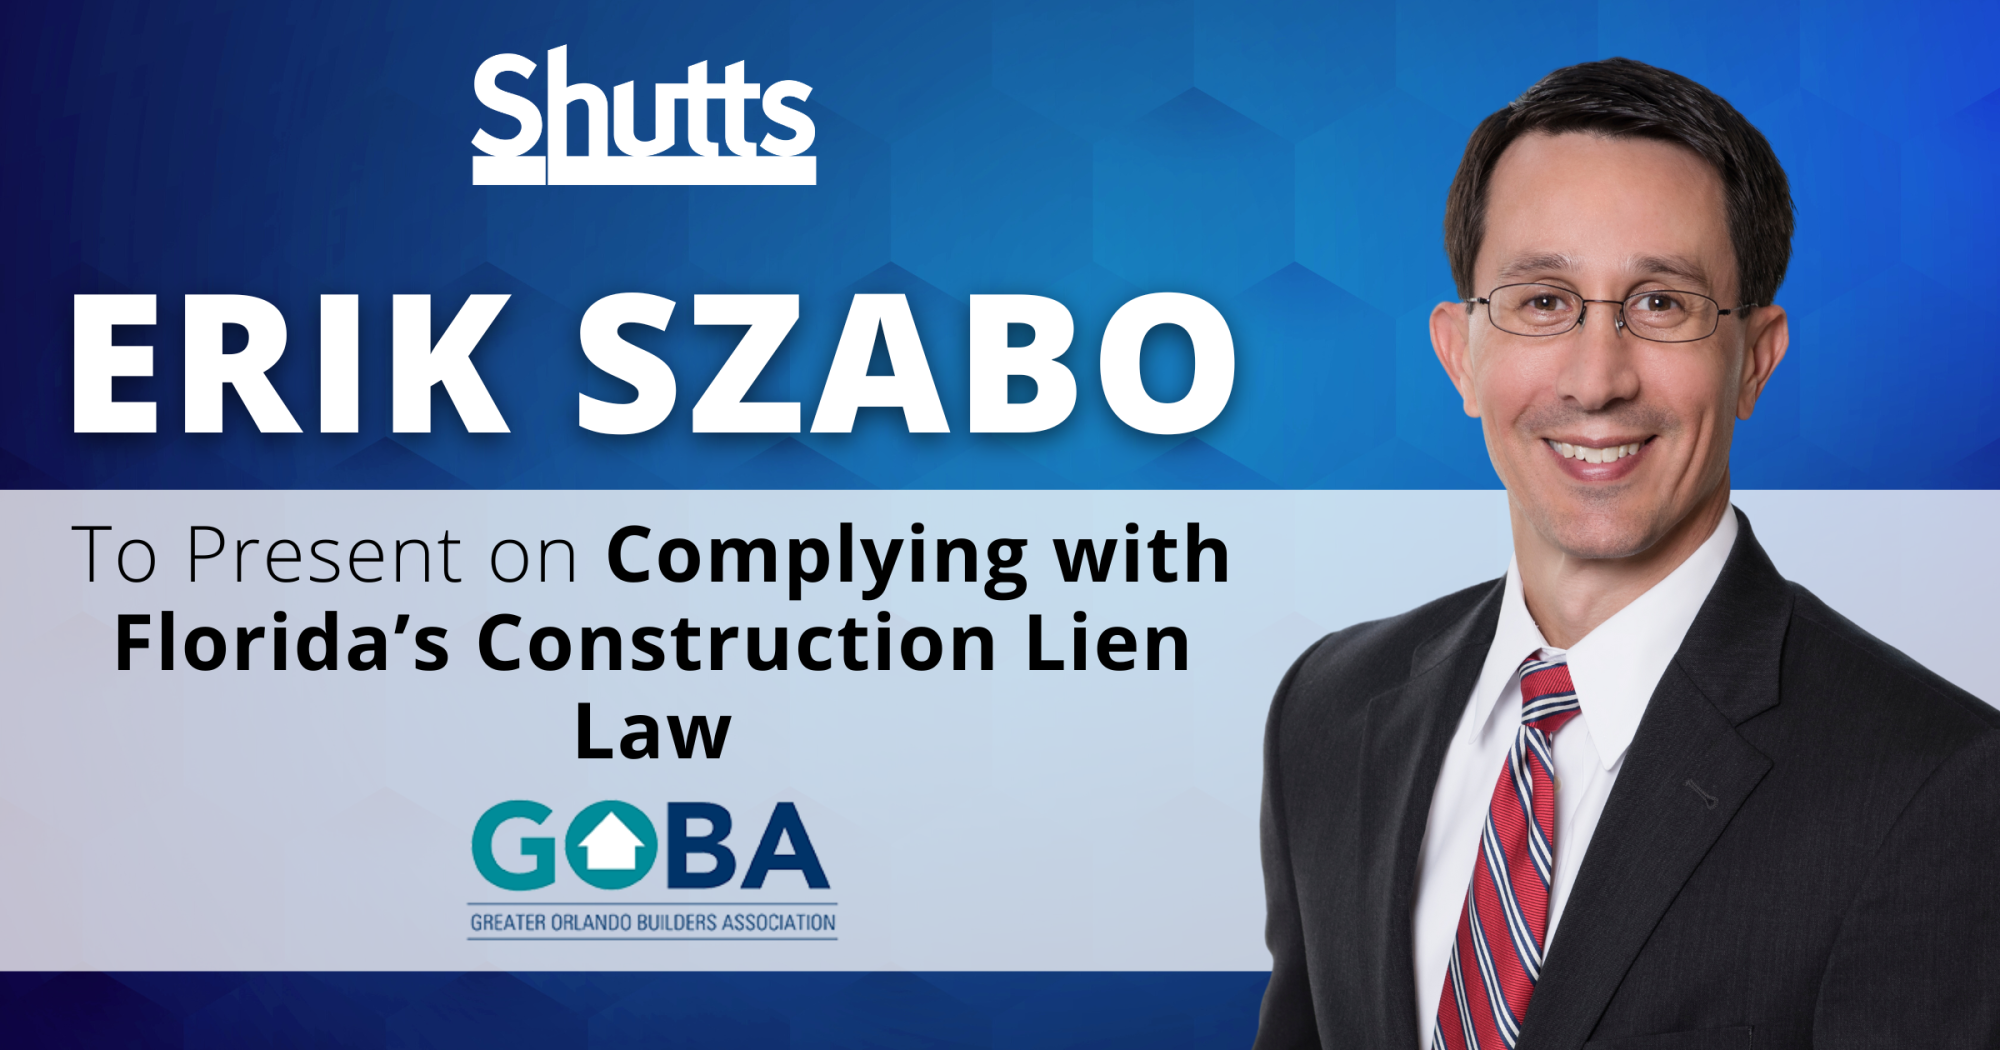 Erik Szabo to Present on Complying with Florida’s Construction Lien Law